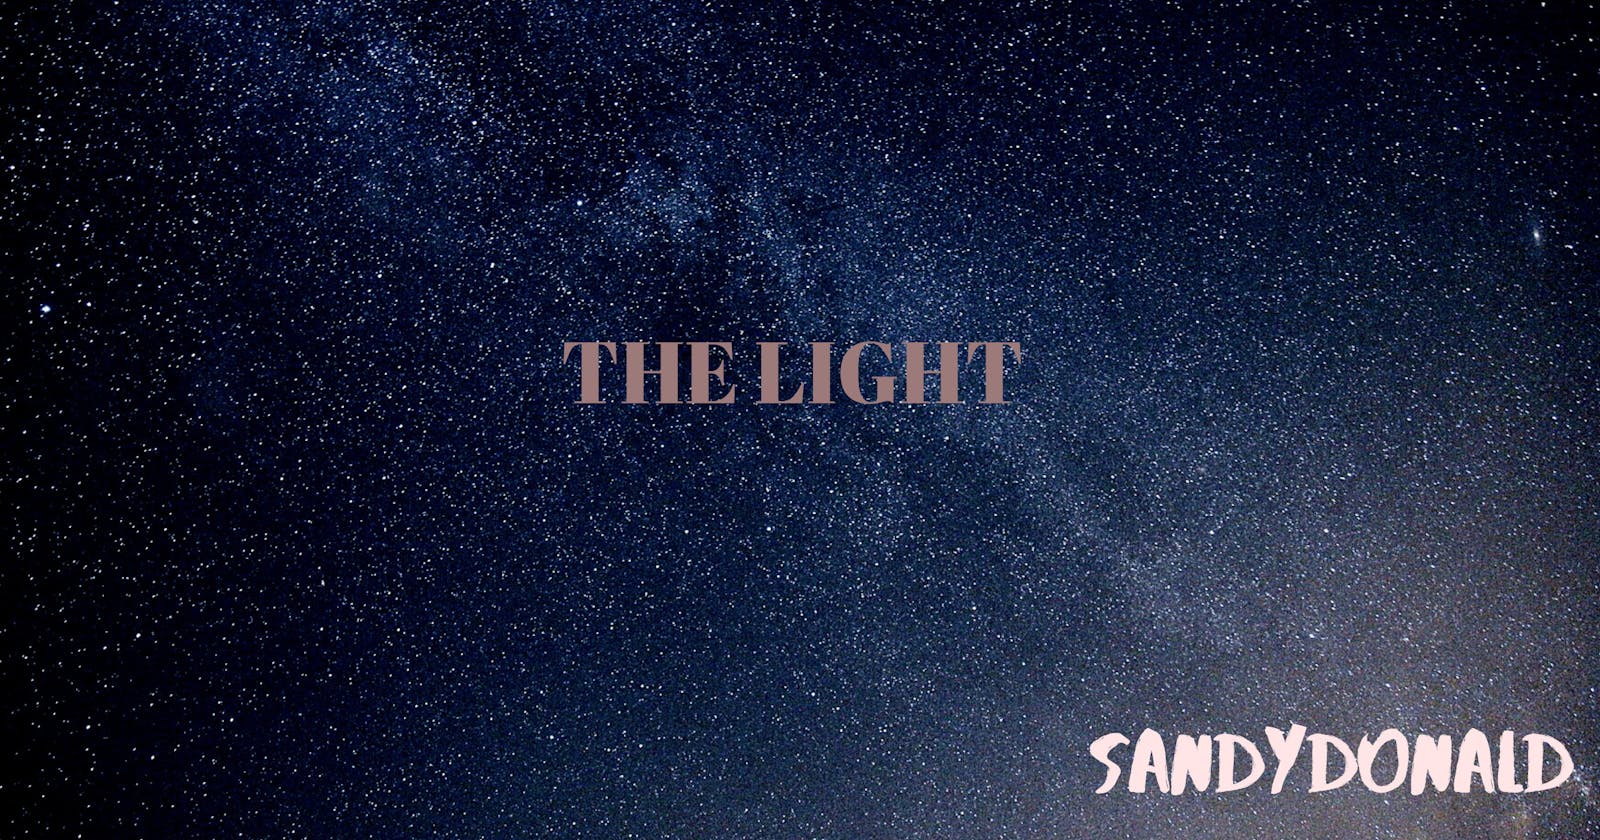 THE LIGHT  Part (1)
BY SANDY DONALD